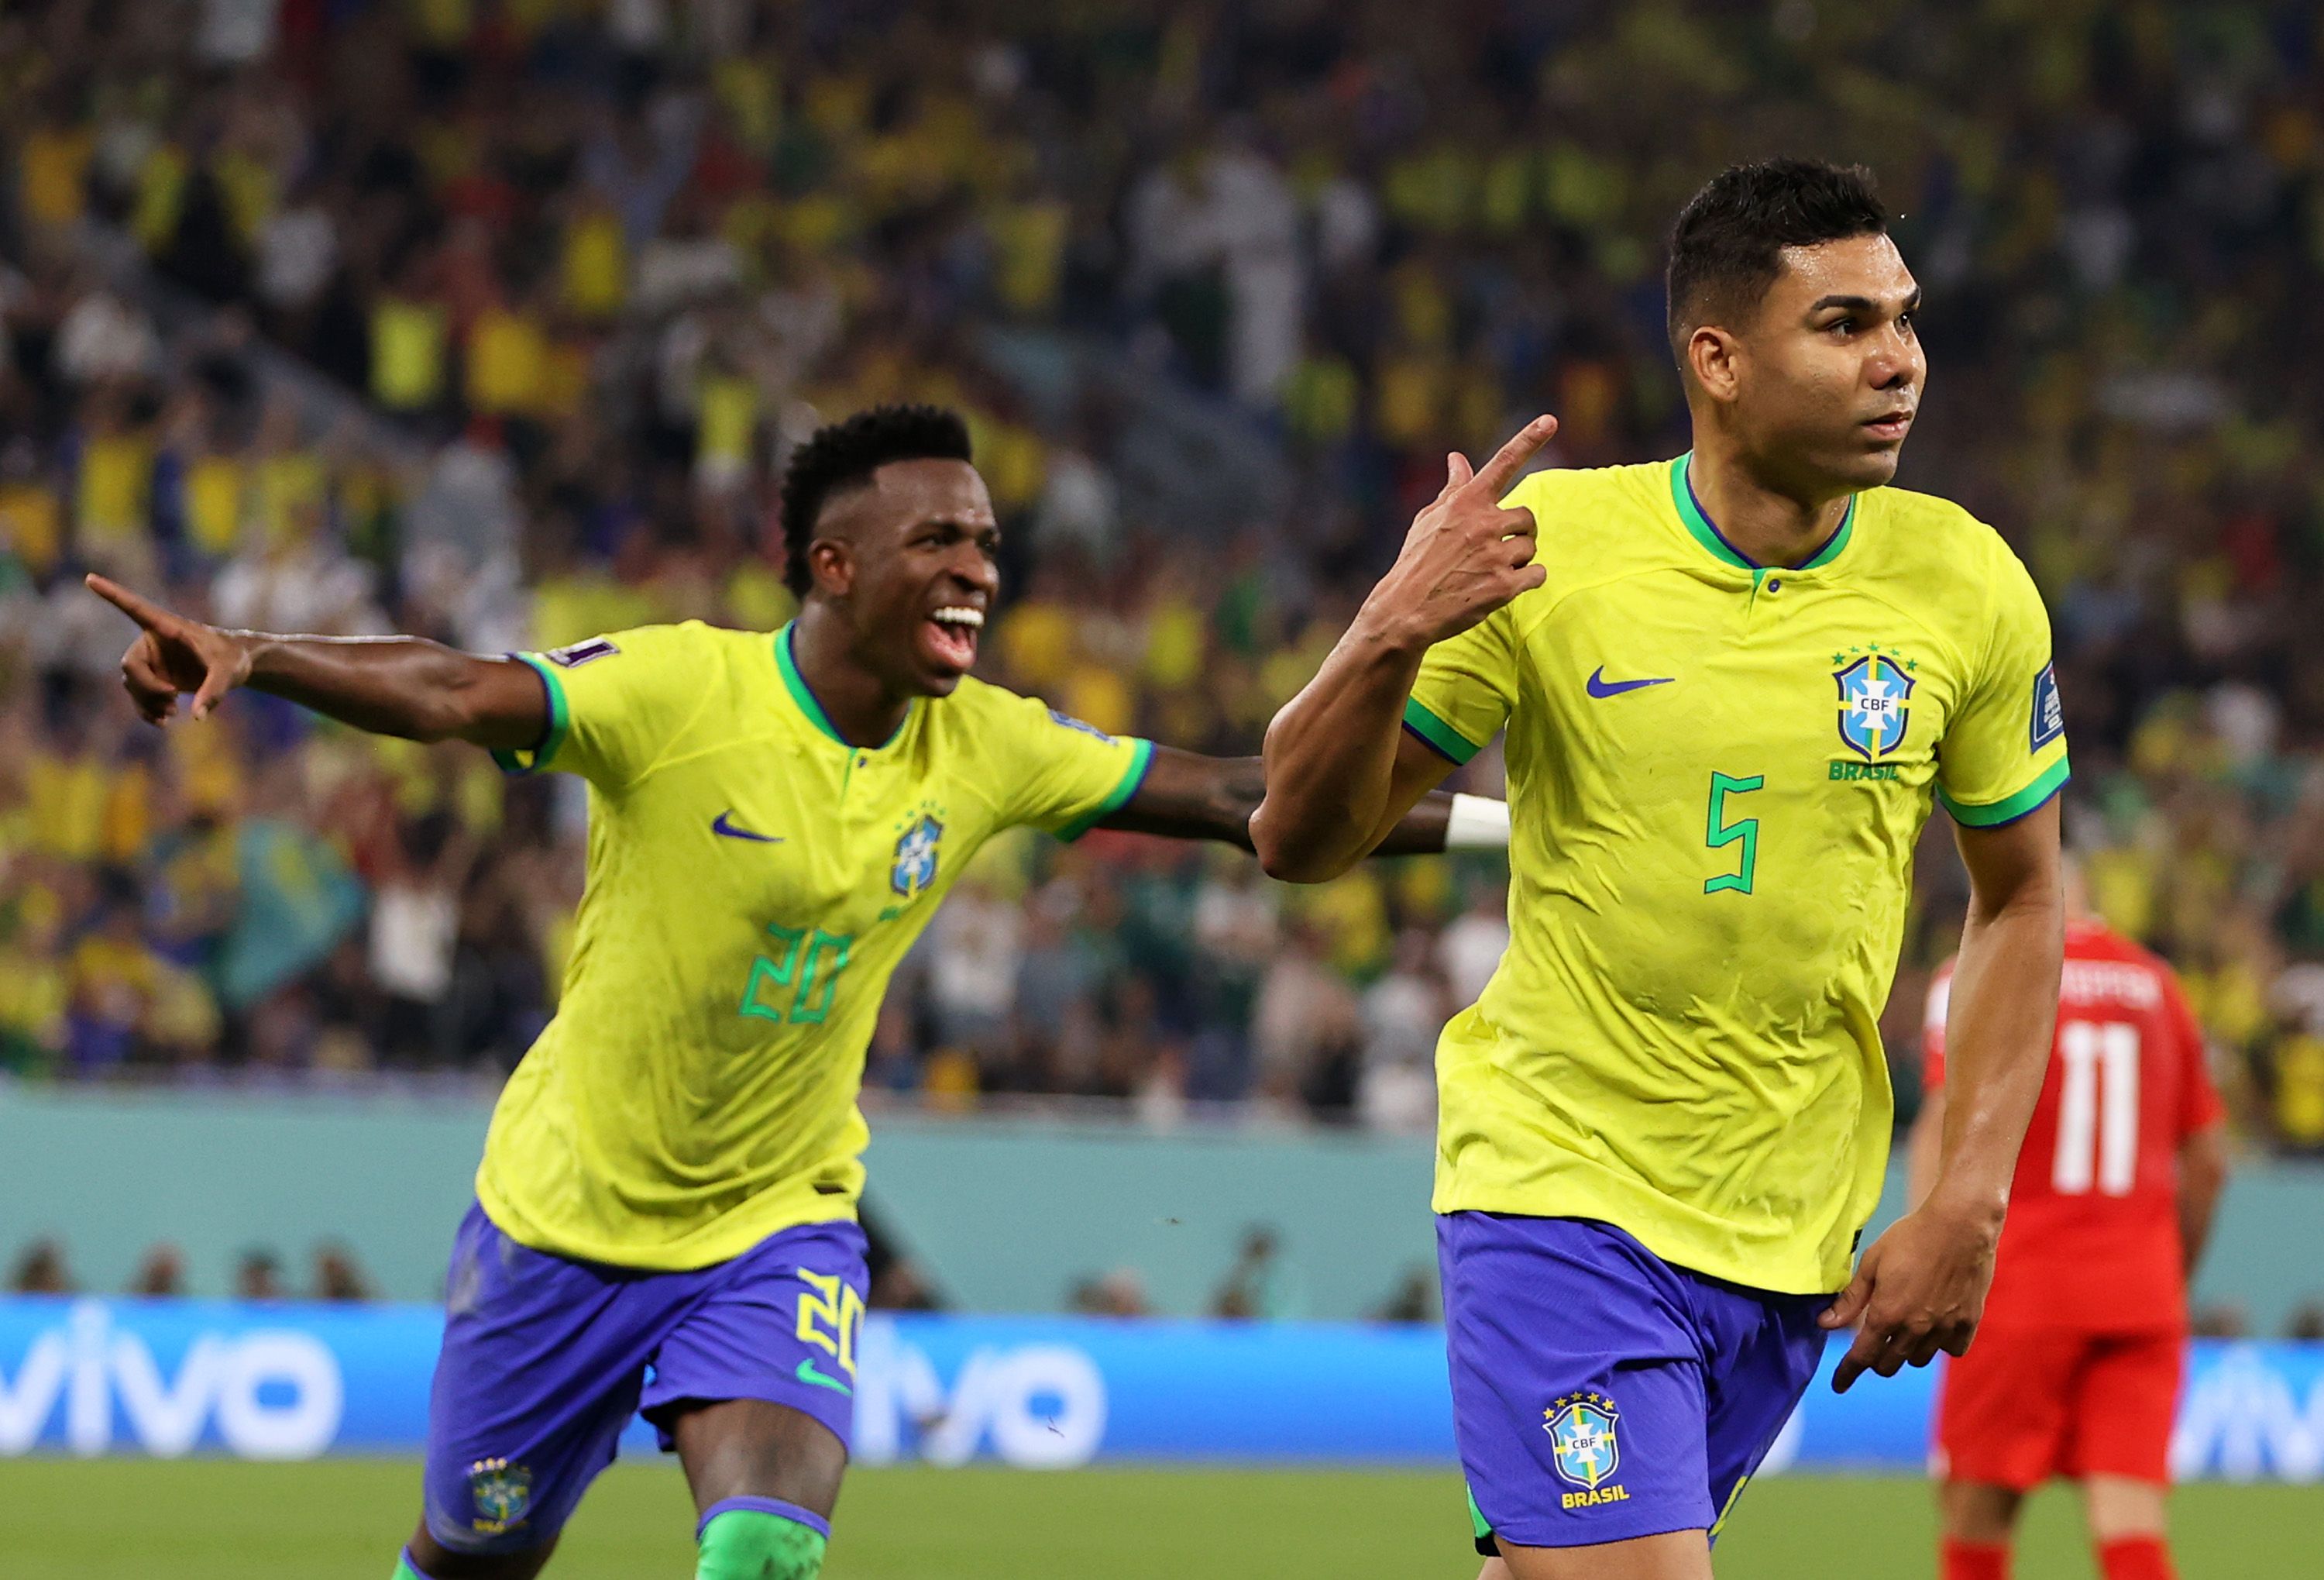 Brazil are tipped to win the World Cup